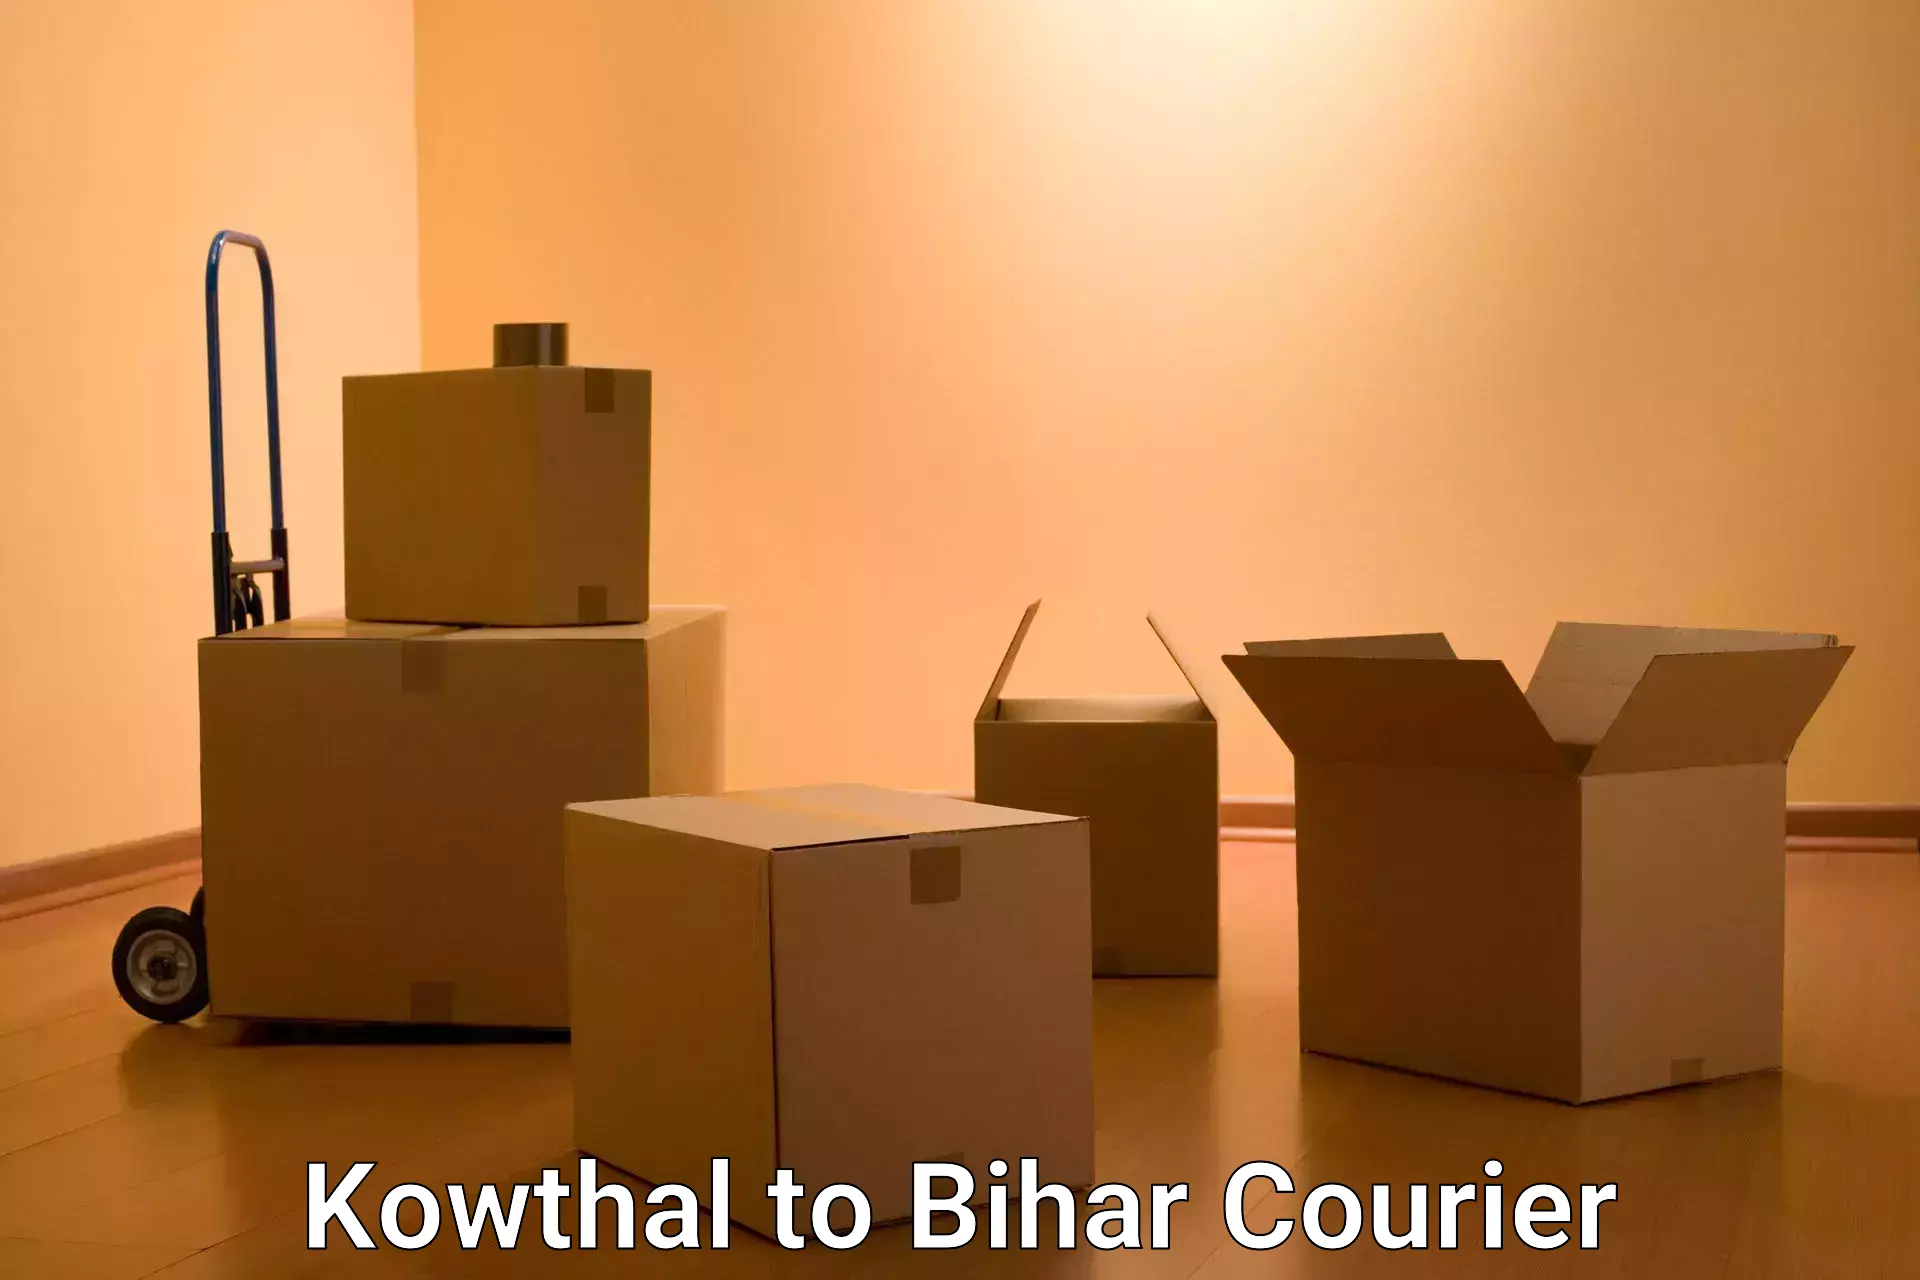 Holiday shipping services in Kowthal to Marhowrah